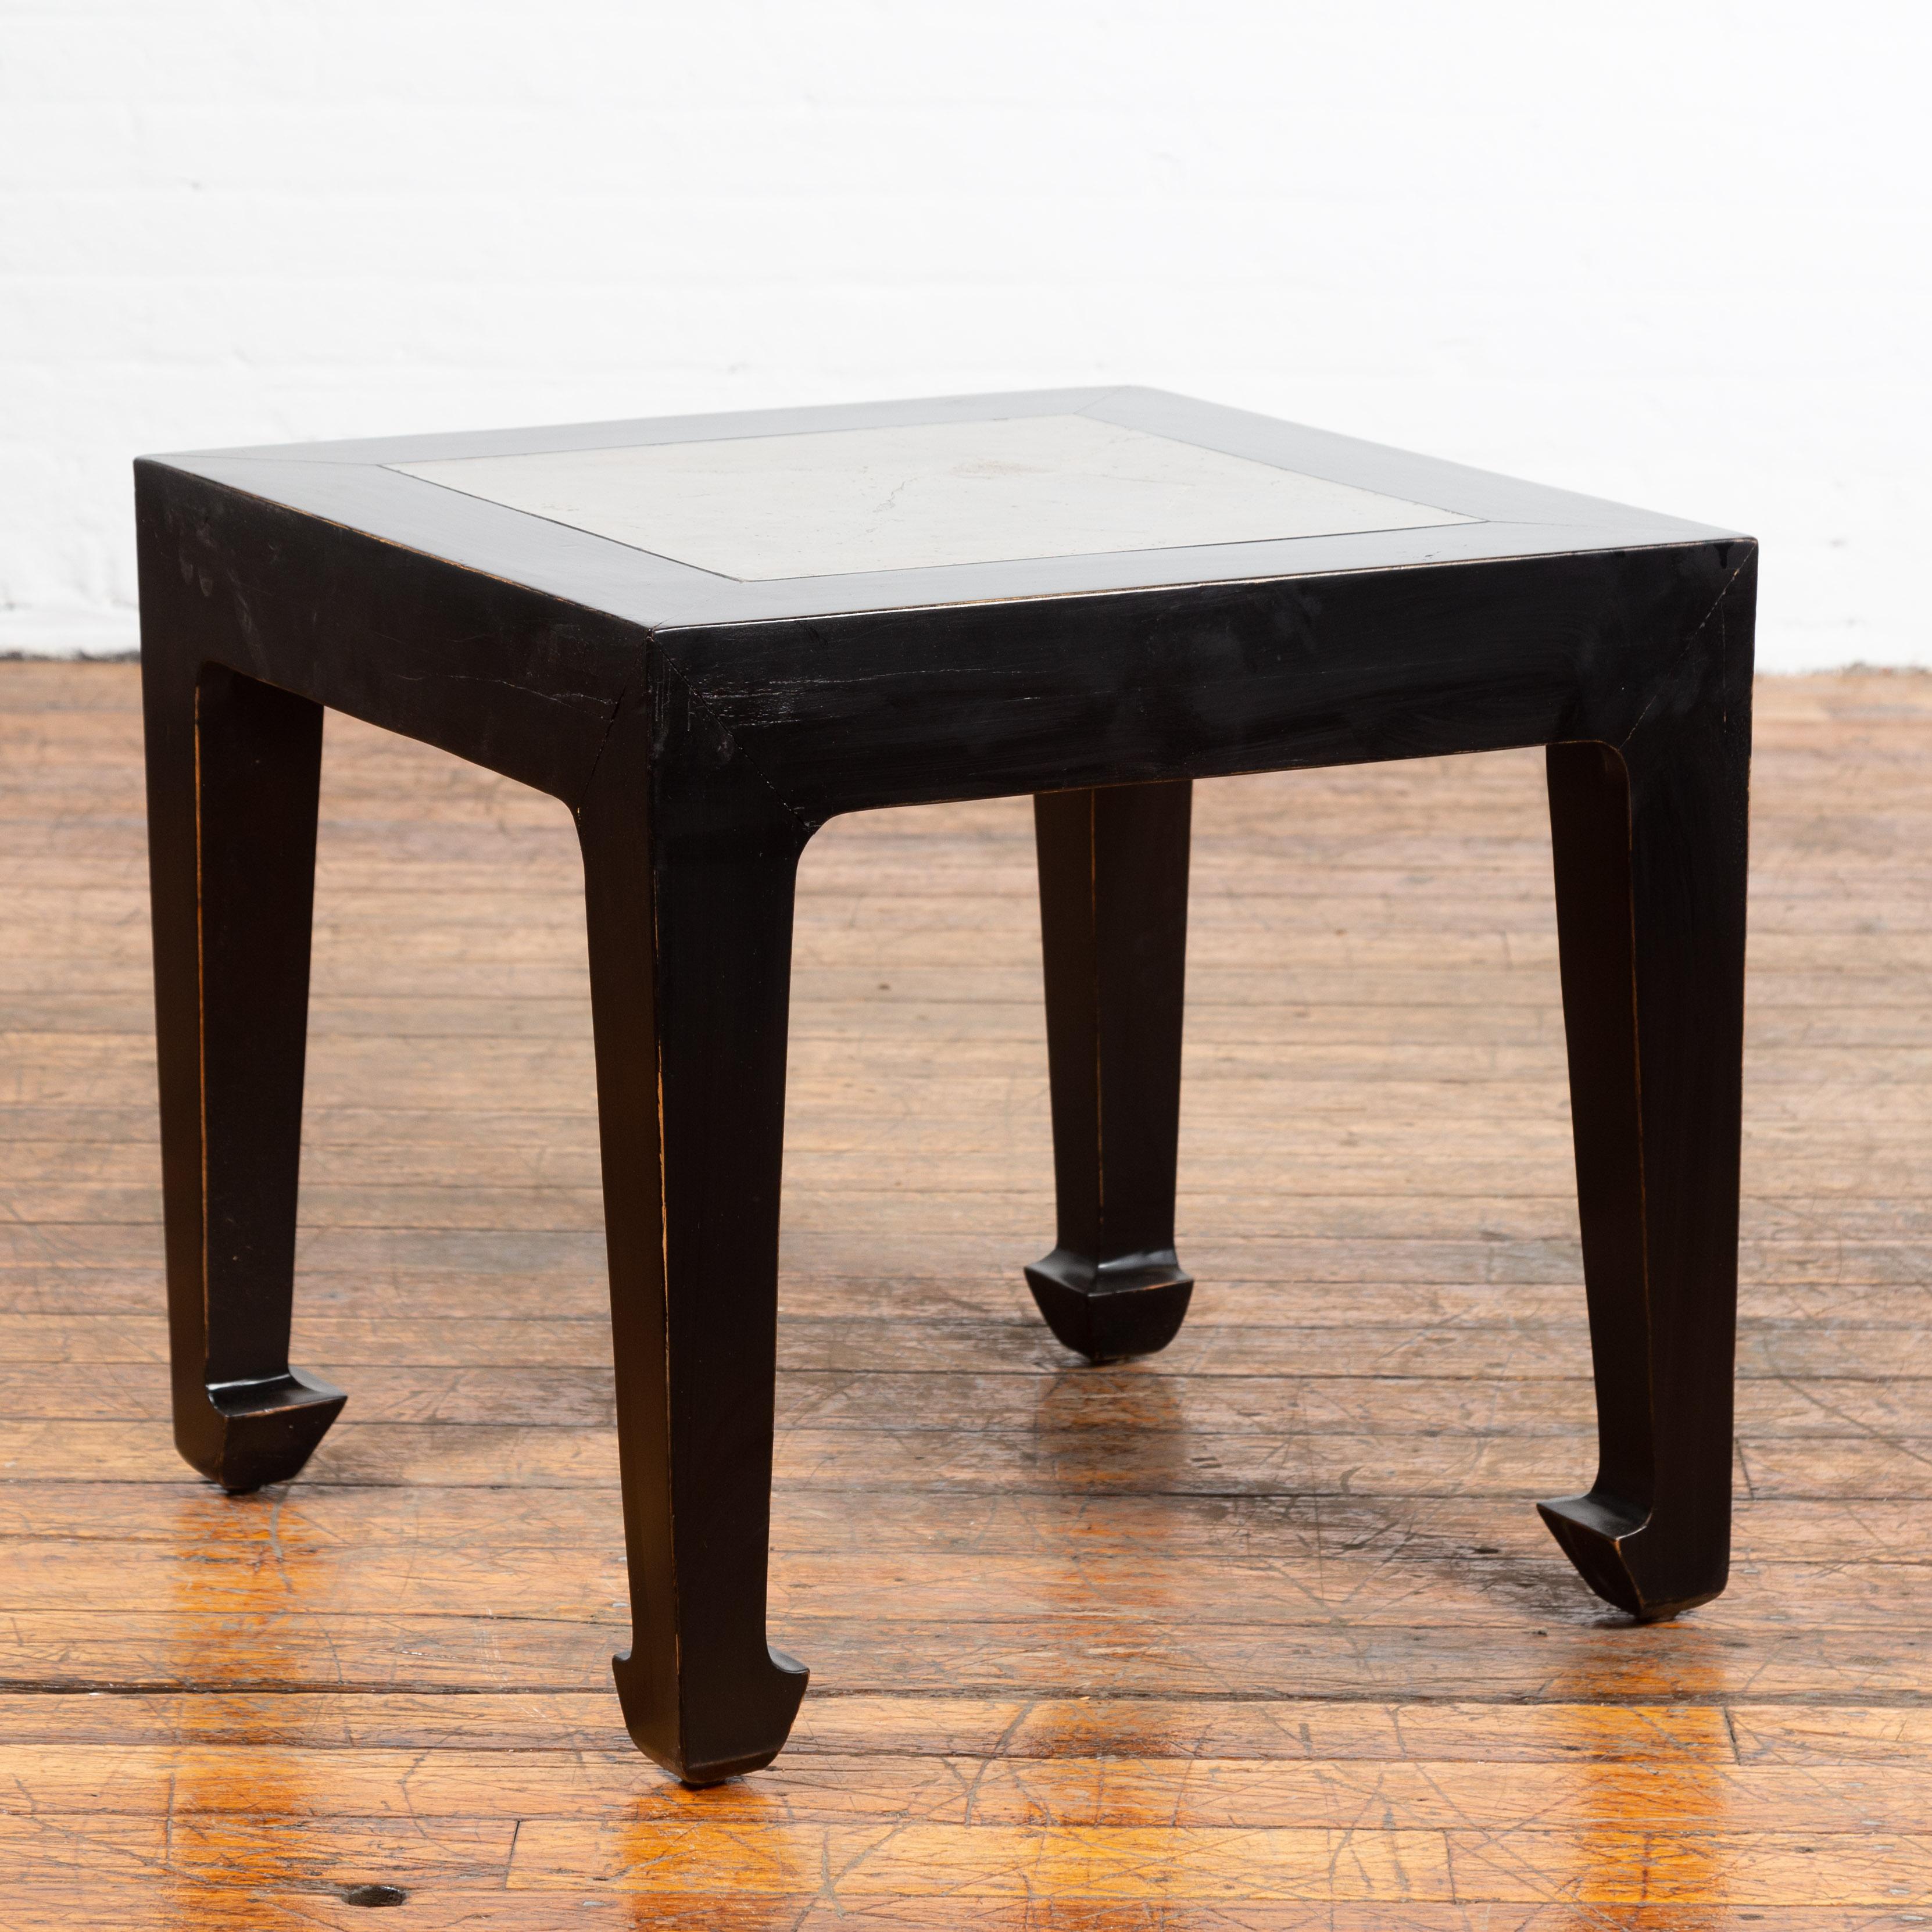 A Chinese vintage black lacquer side table from the mid-20th century with antique Qing Dynasty 19th century stone inset and horse hoof legs. Created in China during the midcentury period, this black lacquer side table features an exquisite grey hued